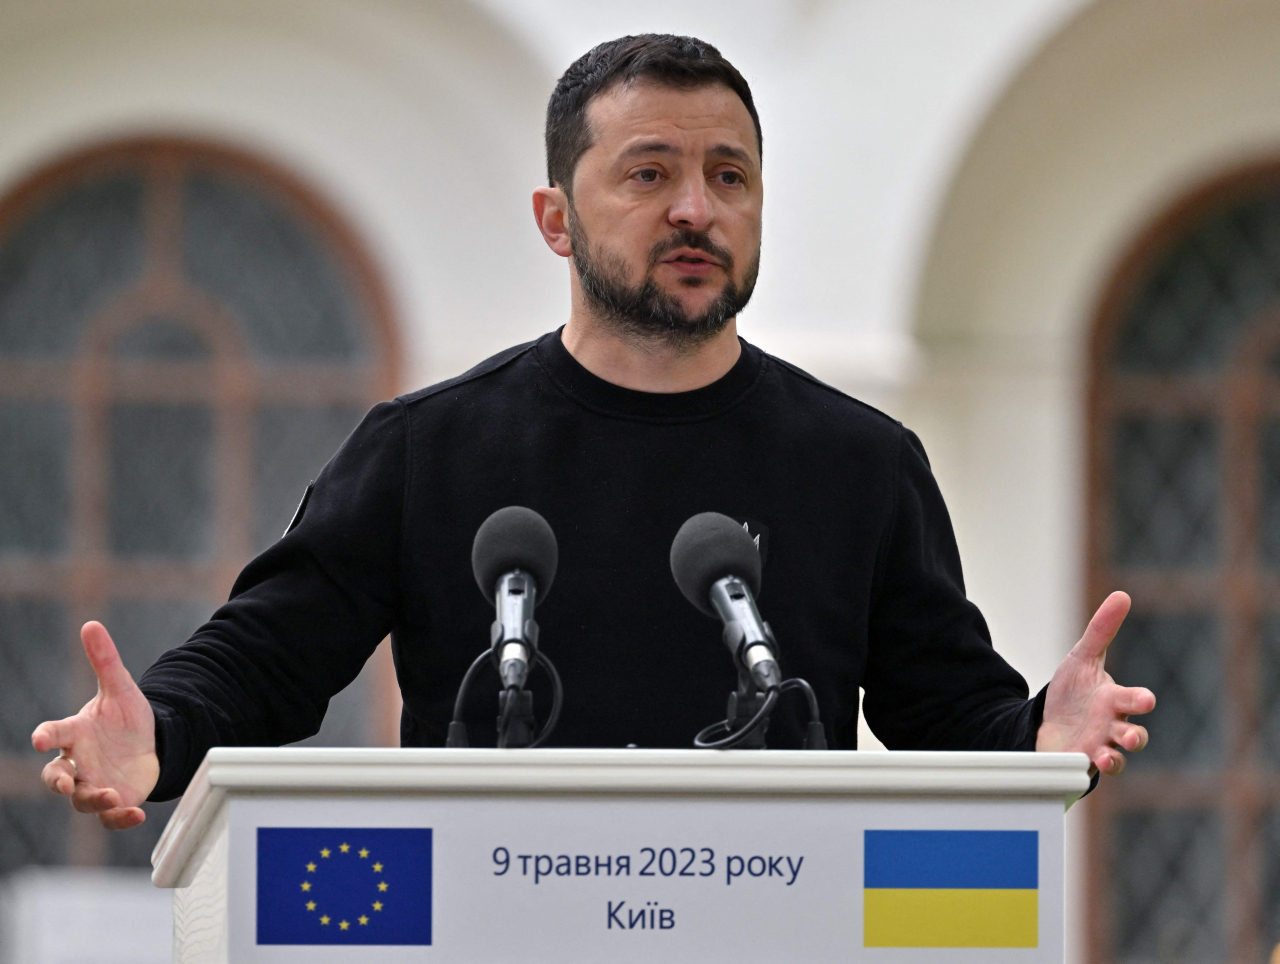 Ukrainian President Volodymyr Zelenskyy speaks during a press conference with President of the European Commission in Kyiv, Ukraine, on Tuesday. (AFP)